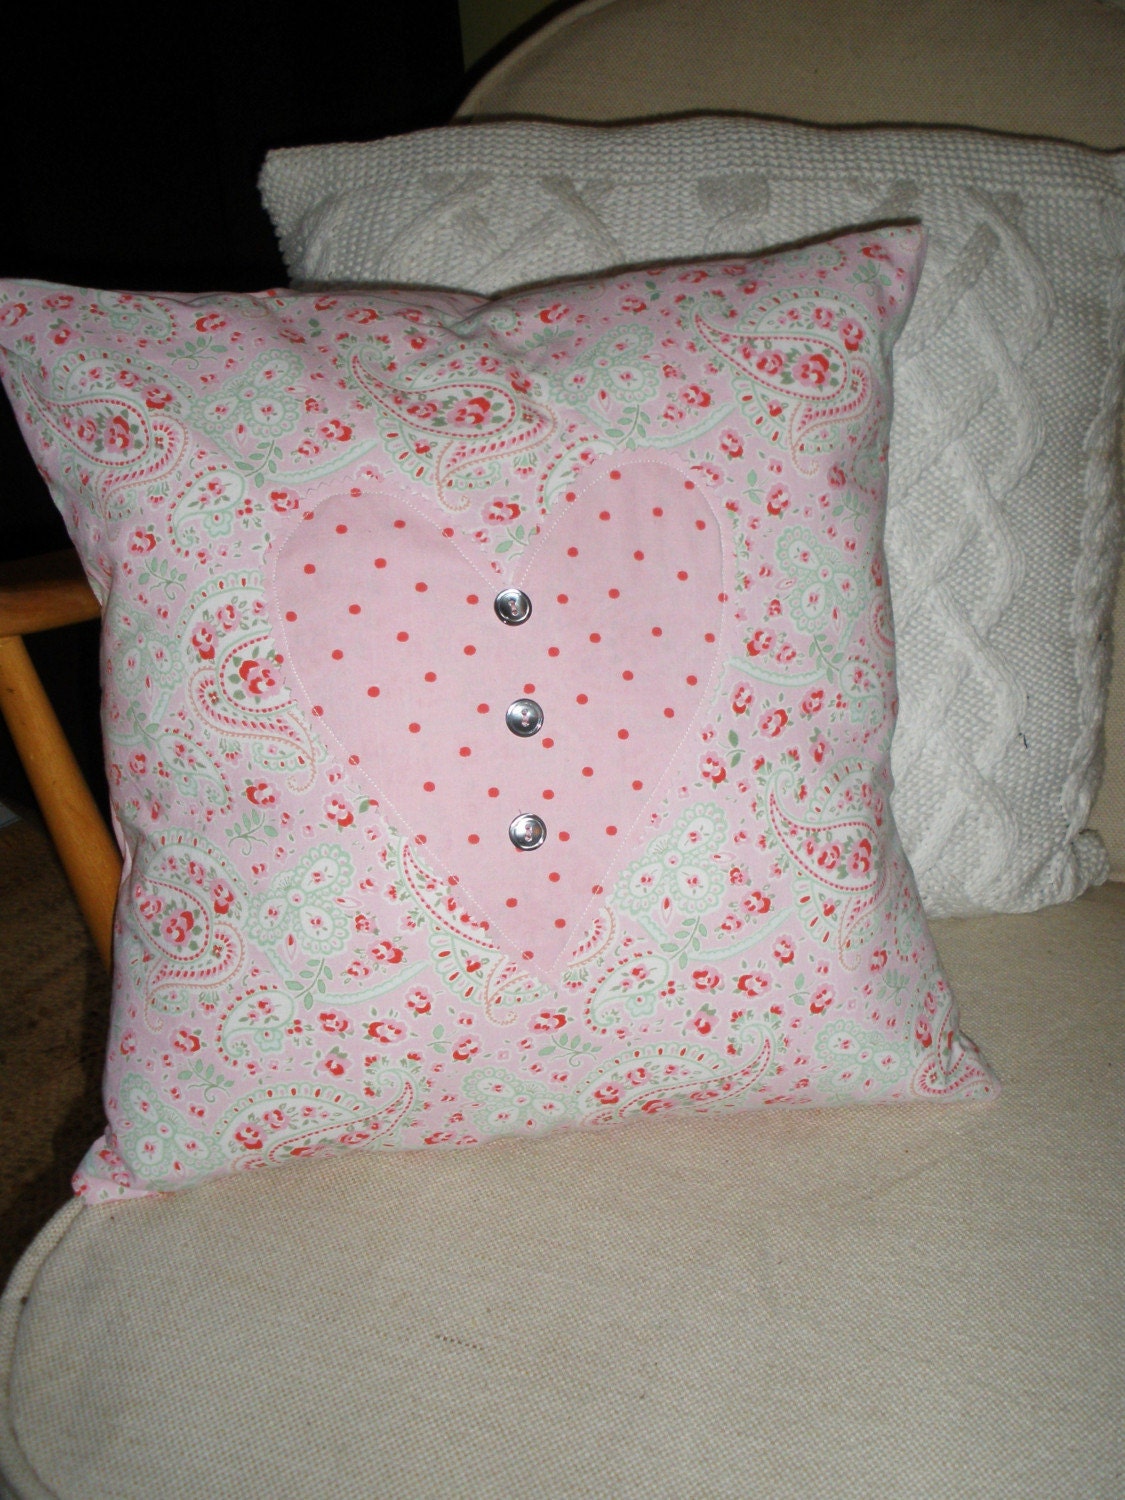 Shabby Chic pillow cushion - pink floral and polka dot cotton lawn heart